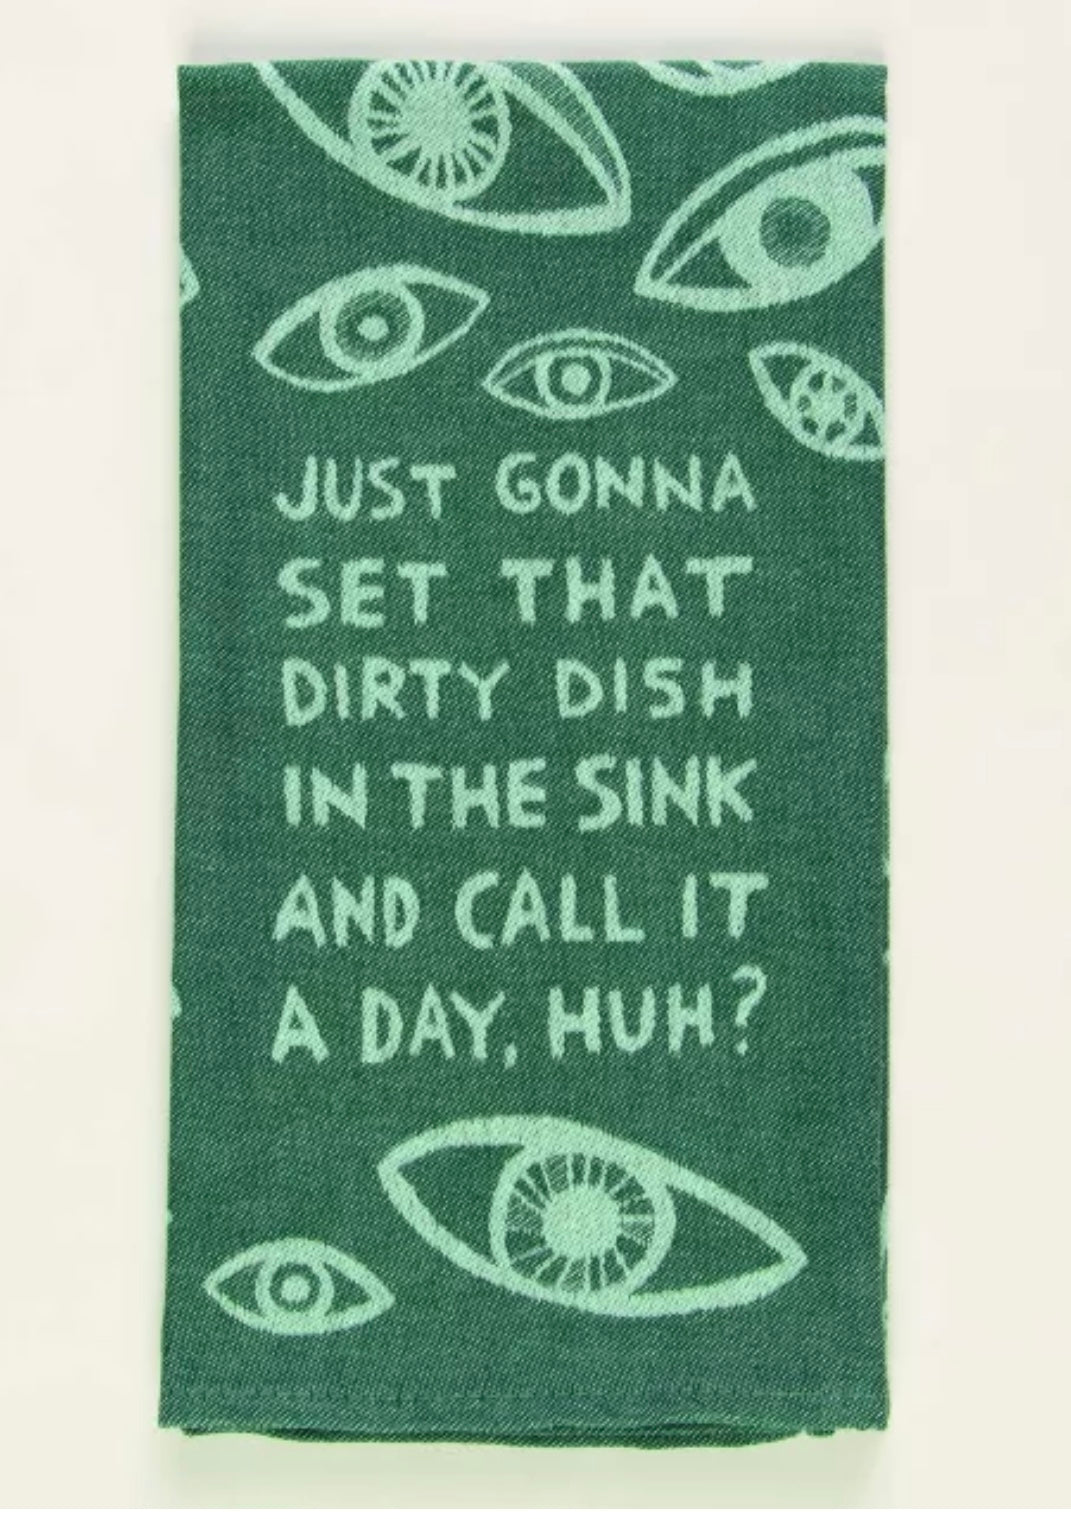 Just Gonna Set that Dirty Dish in the Sink and Call it a Day, huh?  Funny Cotton Woven Jacquard Dish Towel Blue Q Socks